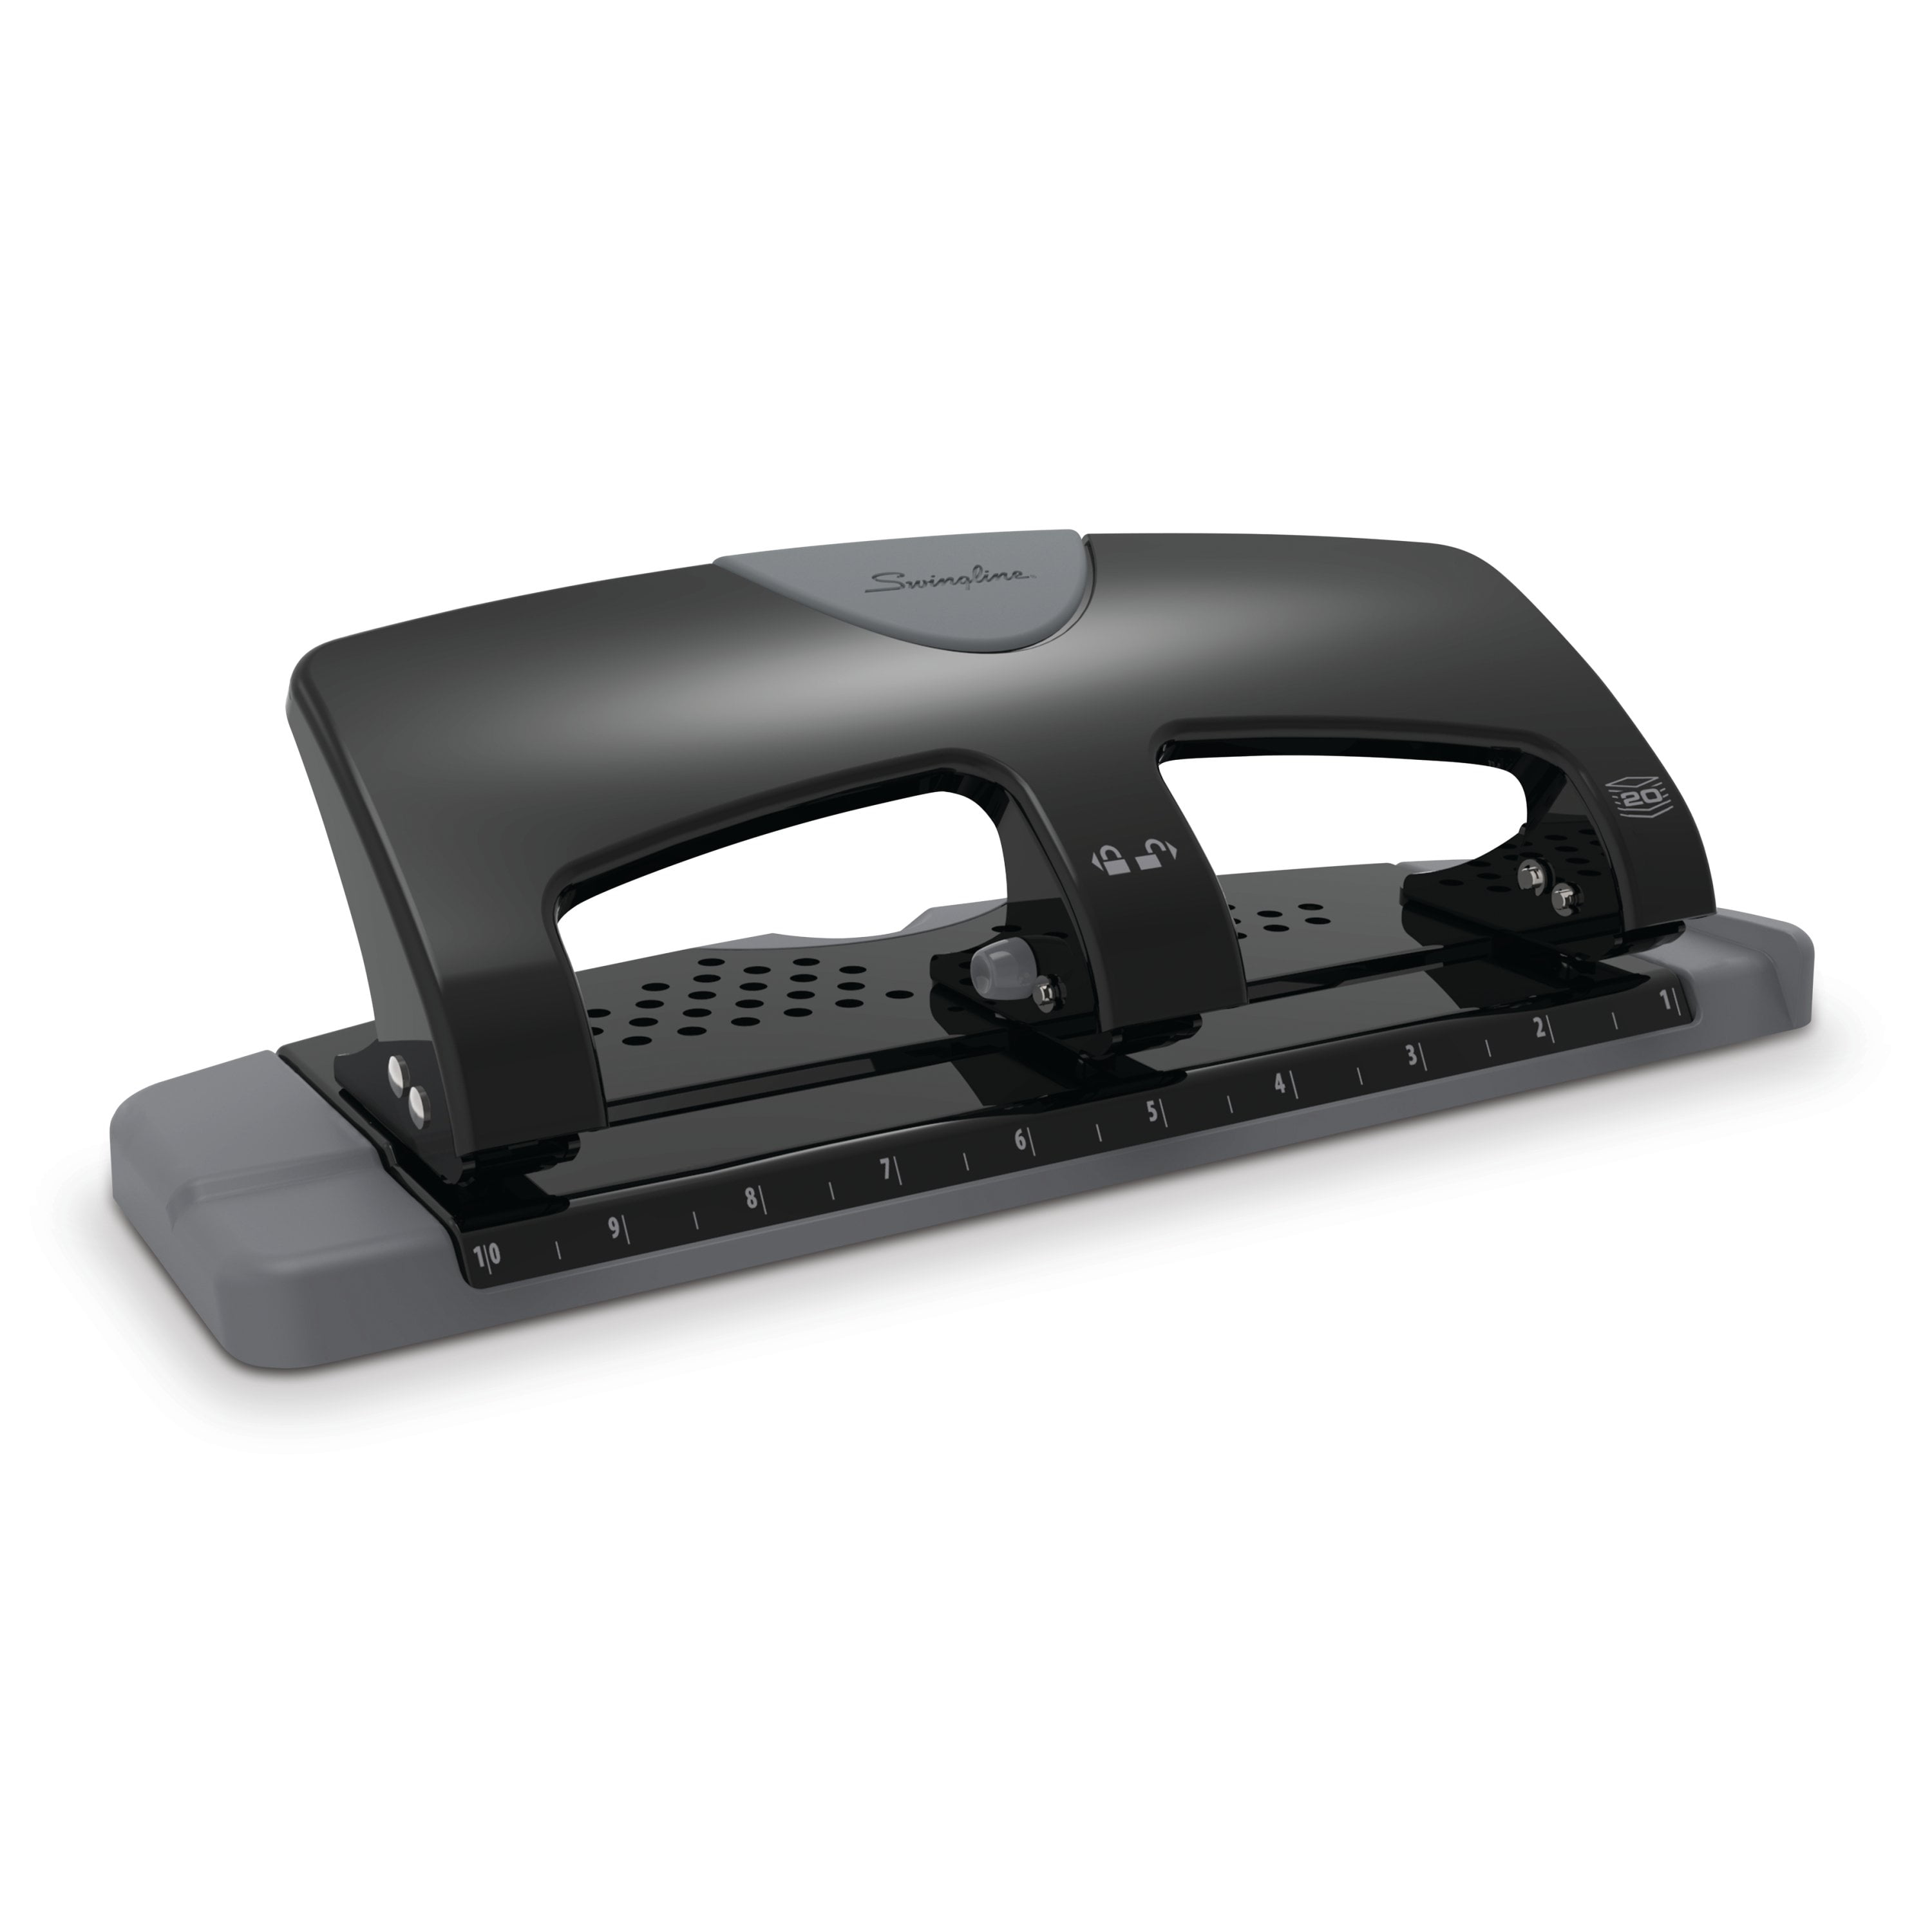 Swingline 3 Hole Punch Categories Desktop Punches 27 Holes LightTouch High 20 for sale online 